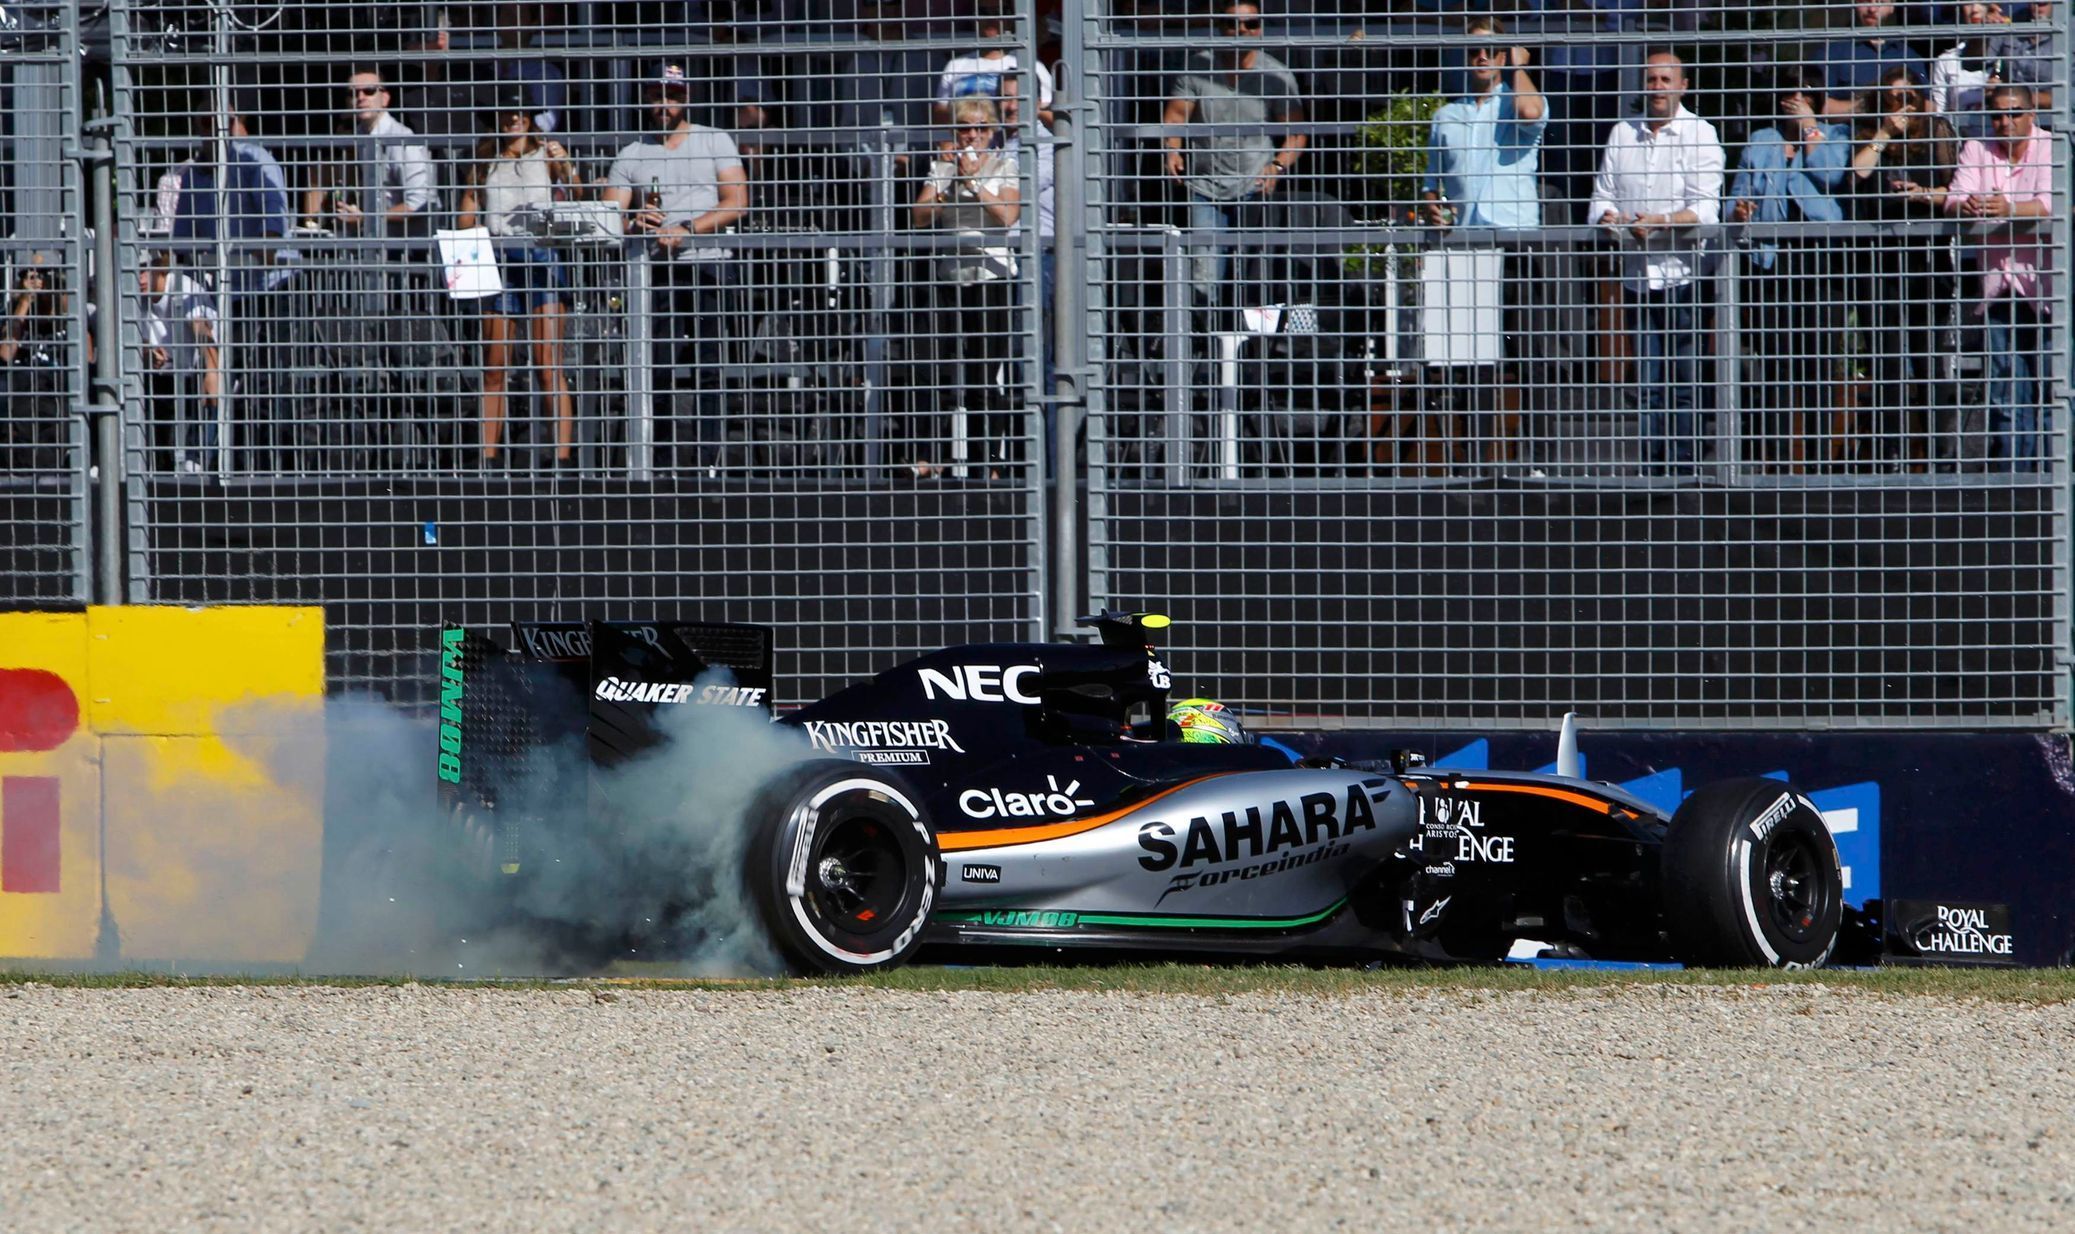 Force India Formula One driver Sergio Perez of Mexico drives into the gravel after being clipped by McLaren Formula One driver Jenson Button of Britain during the Australian F1 Grand Prix at the Alber